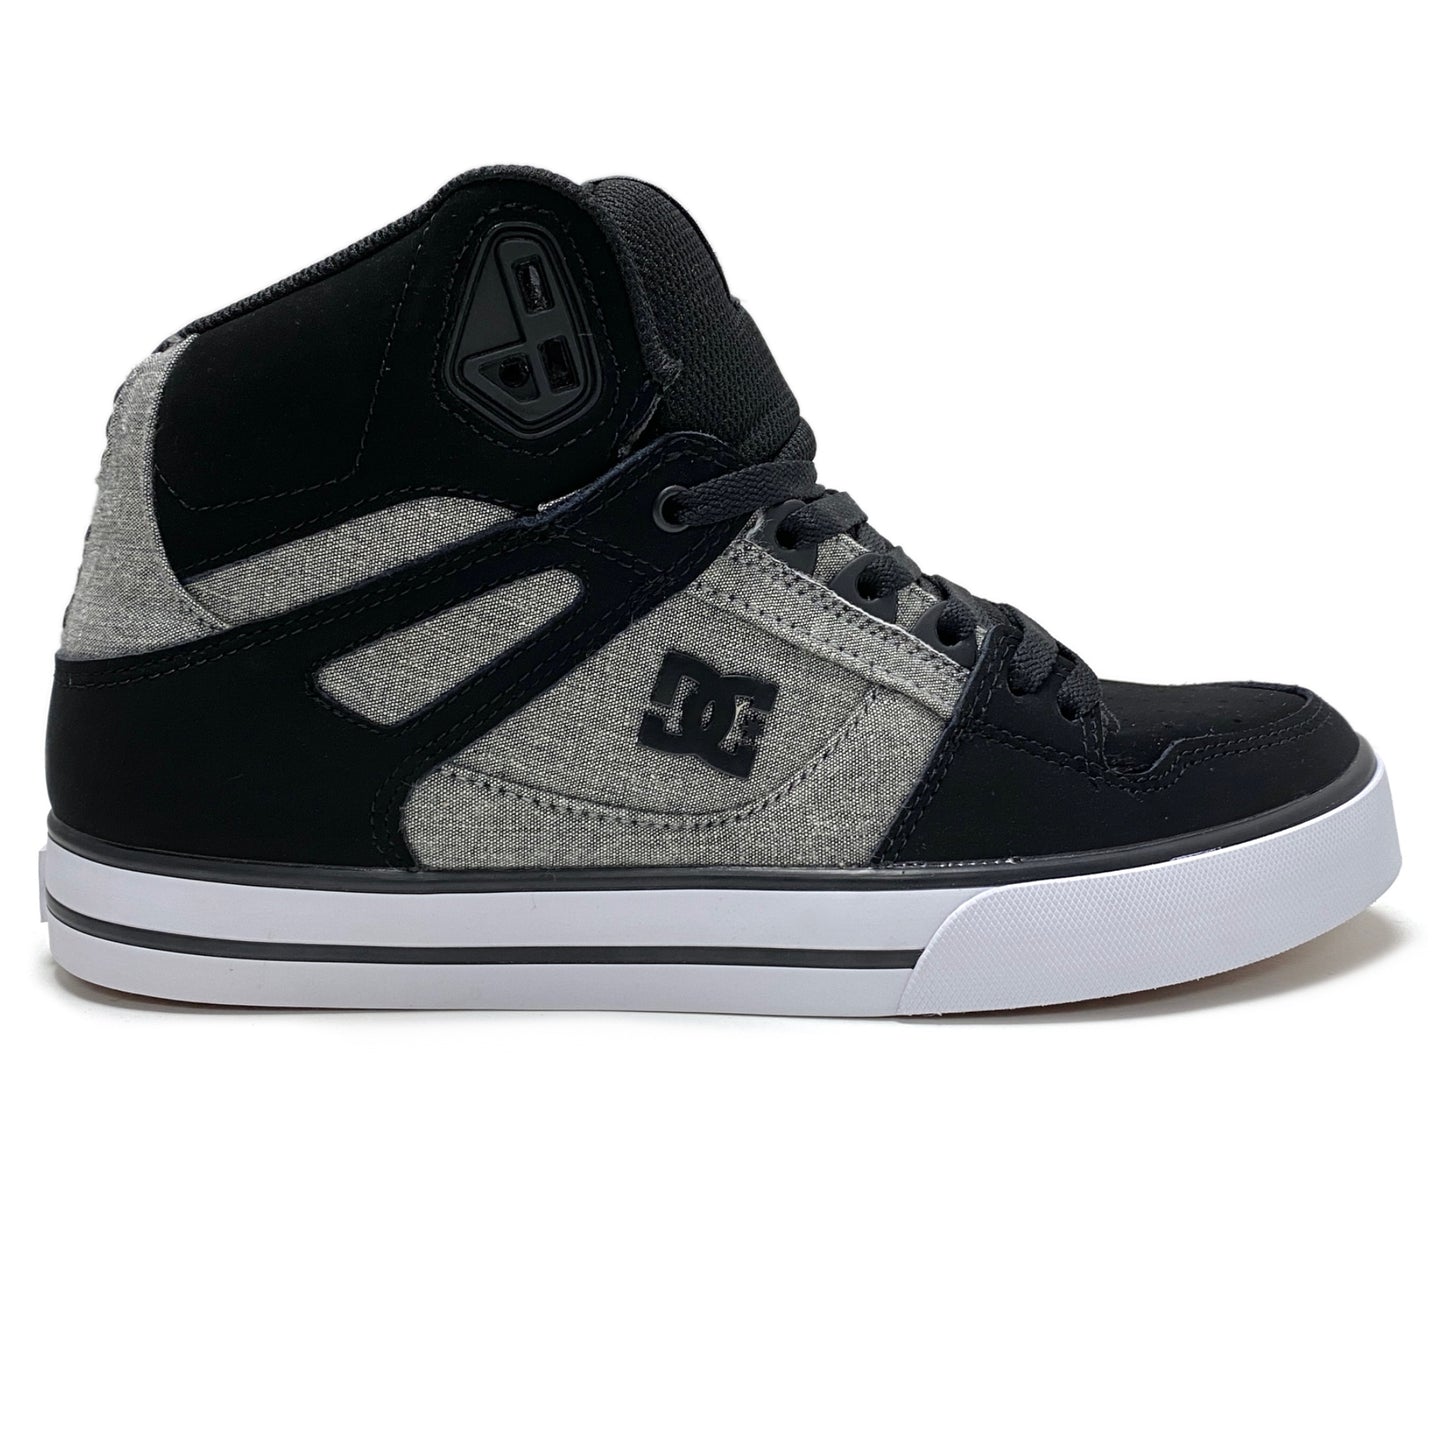 DC SHOES PURE HIGH TOP WC BLACK BATTLESHIP ARMOR TRAINERS